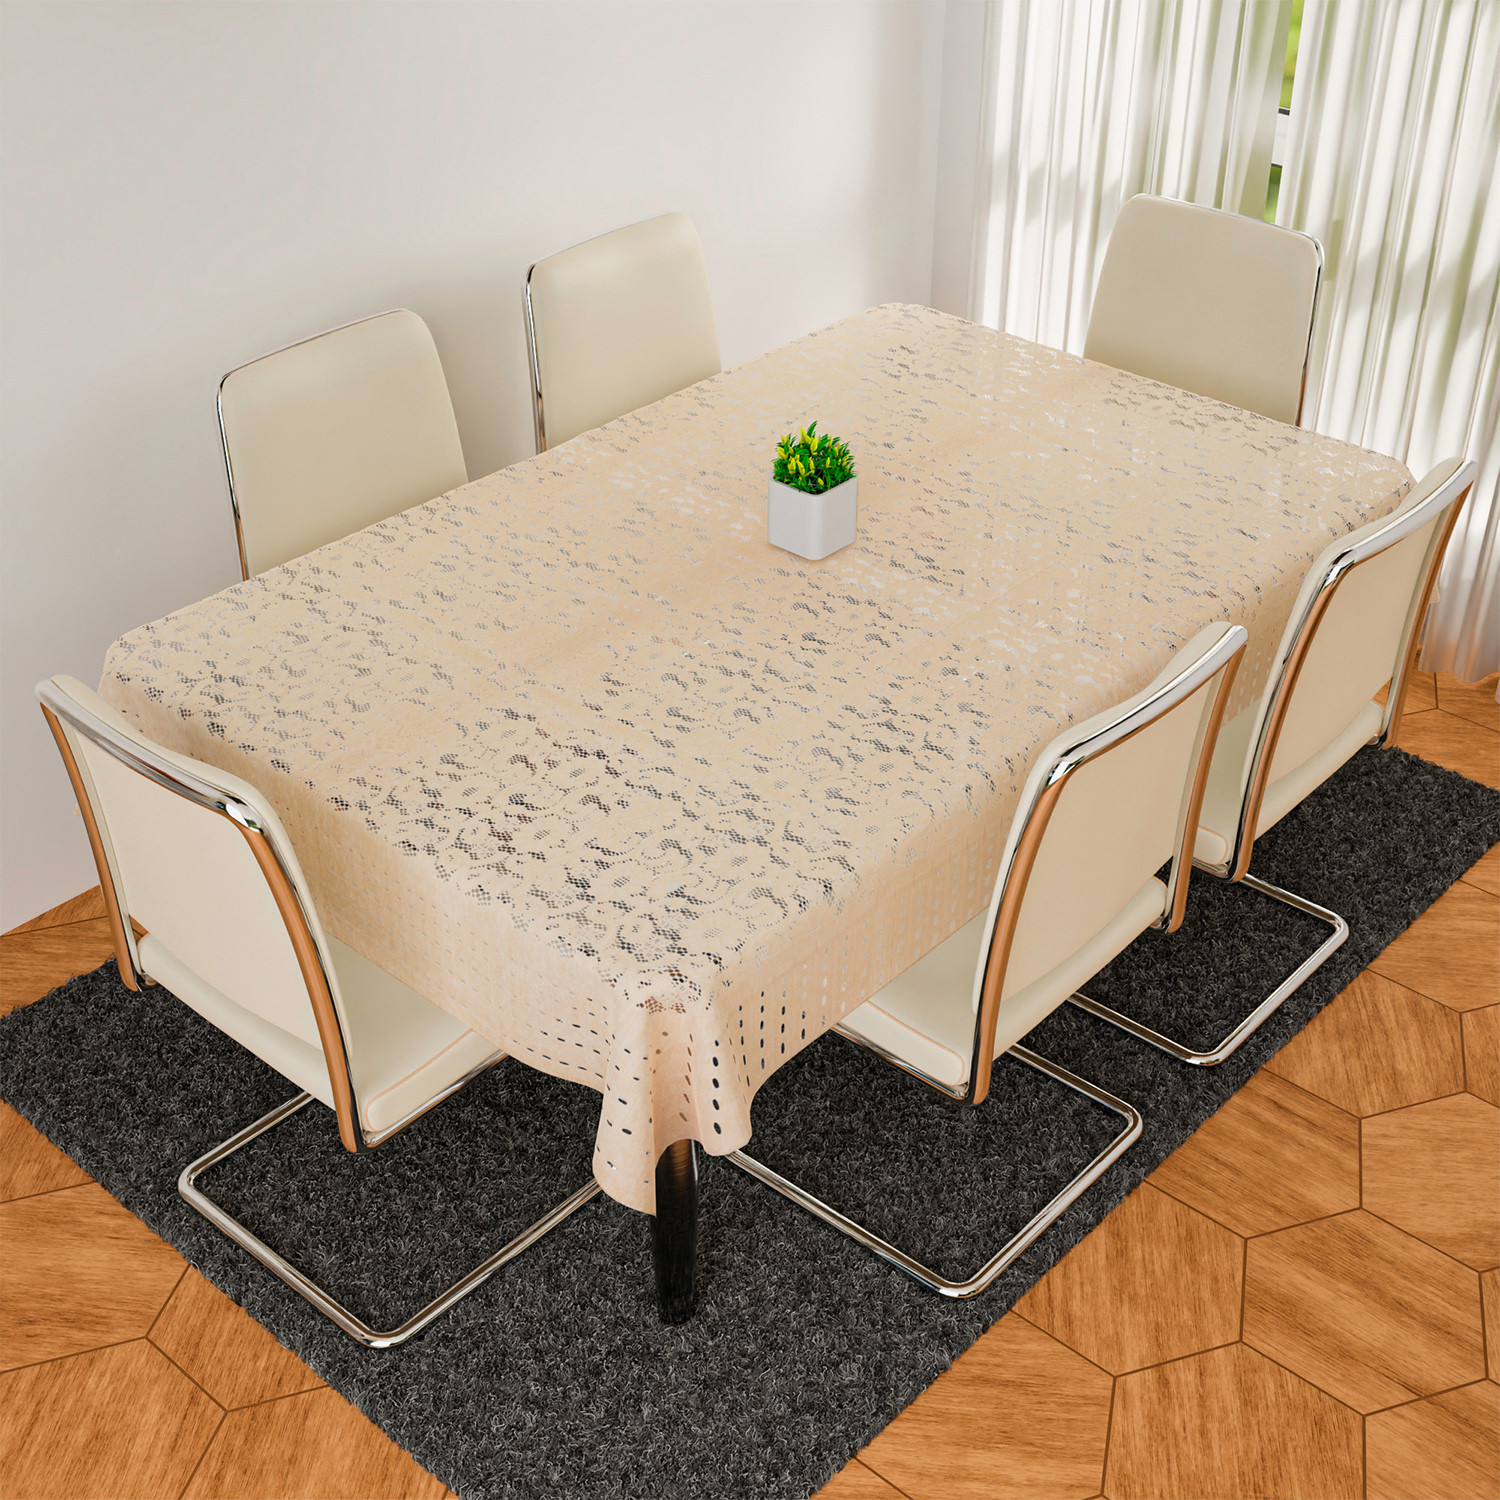 Kuber Industries Dining Table Cover | Cashew Design Dining Table Cover | Shinning Net Dining Table Cover | Table Cover for Home Décor | 60x90 | Cream